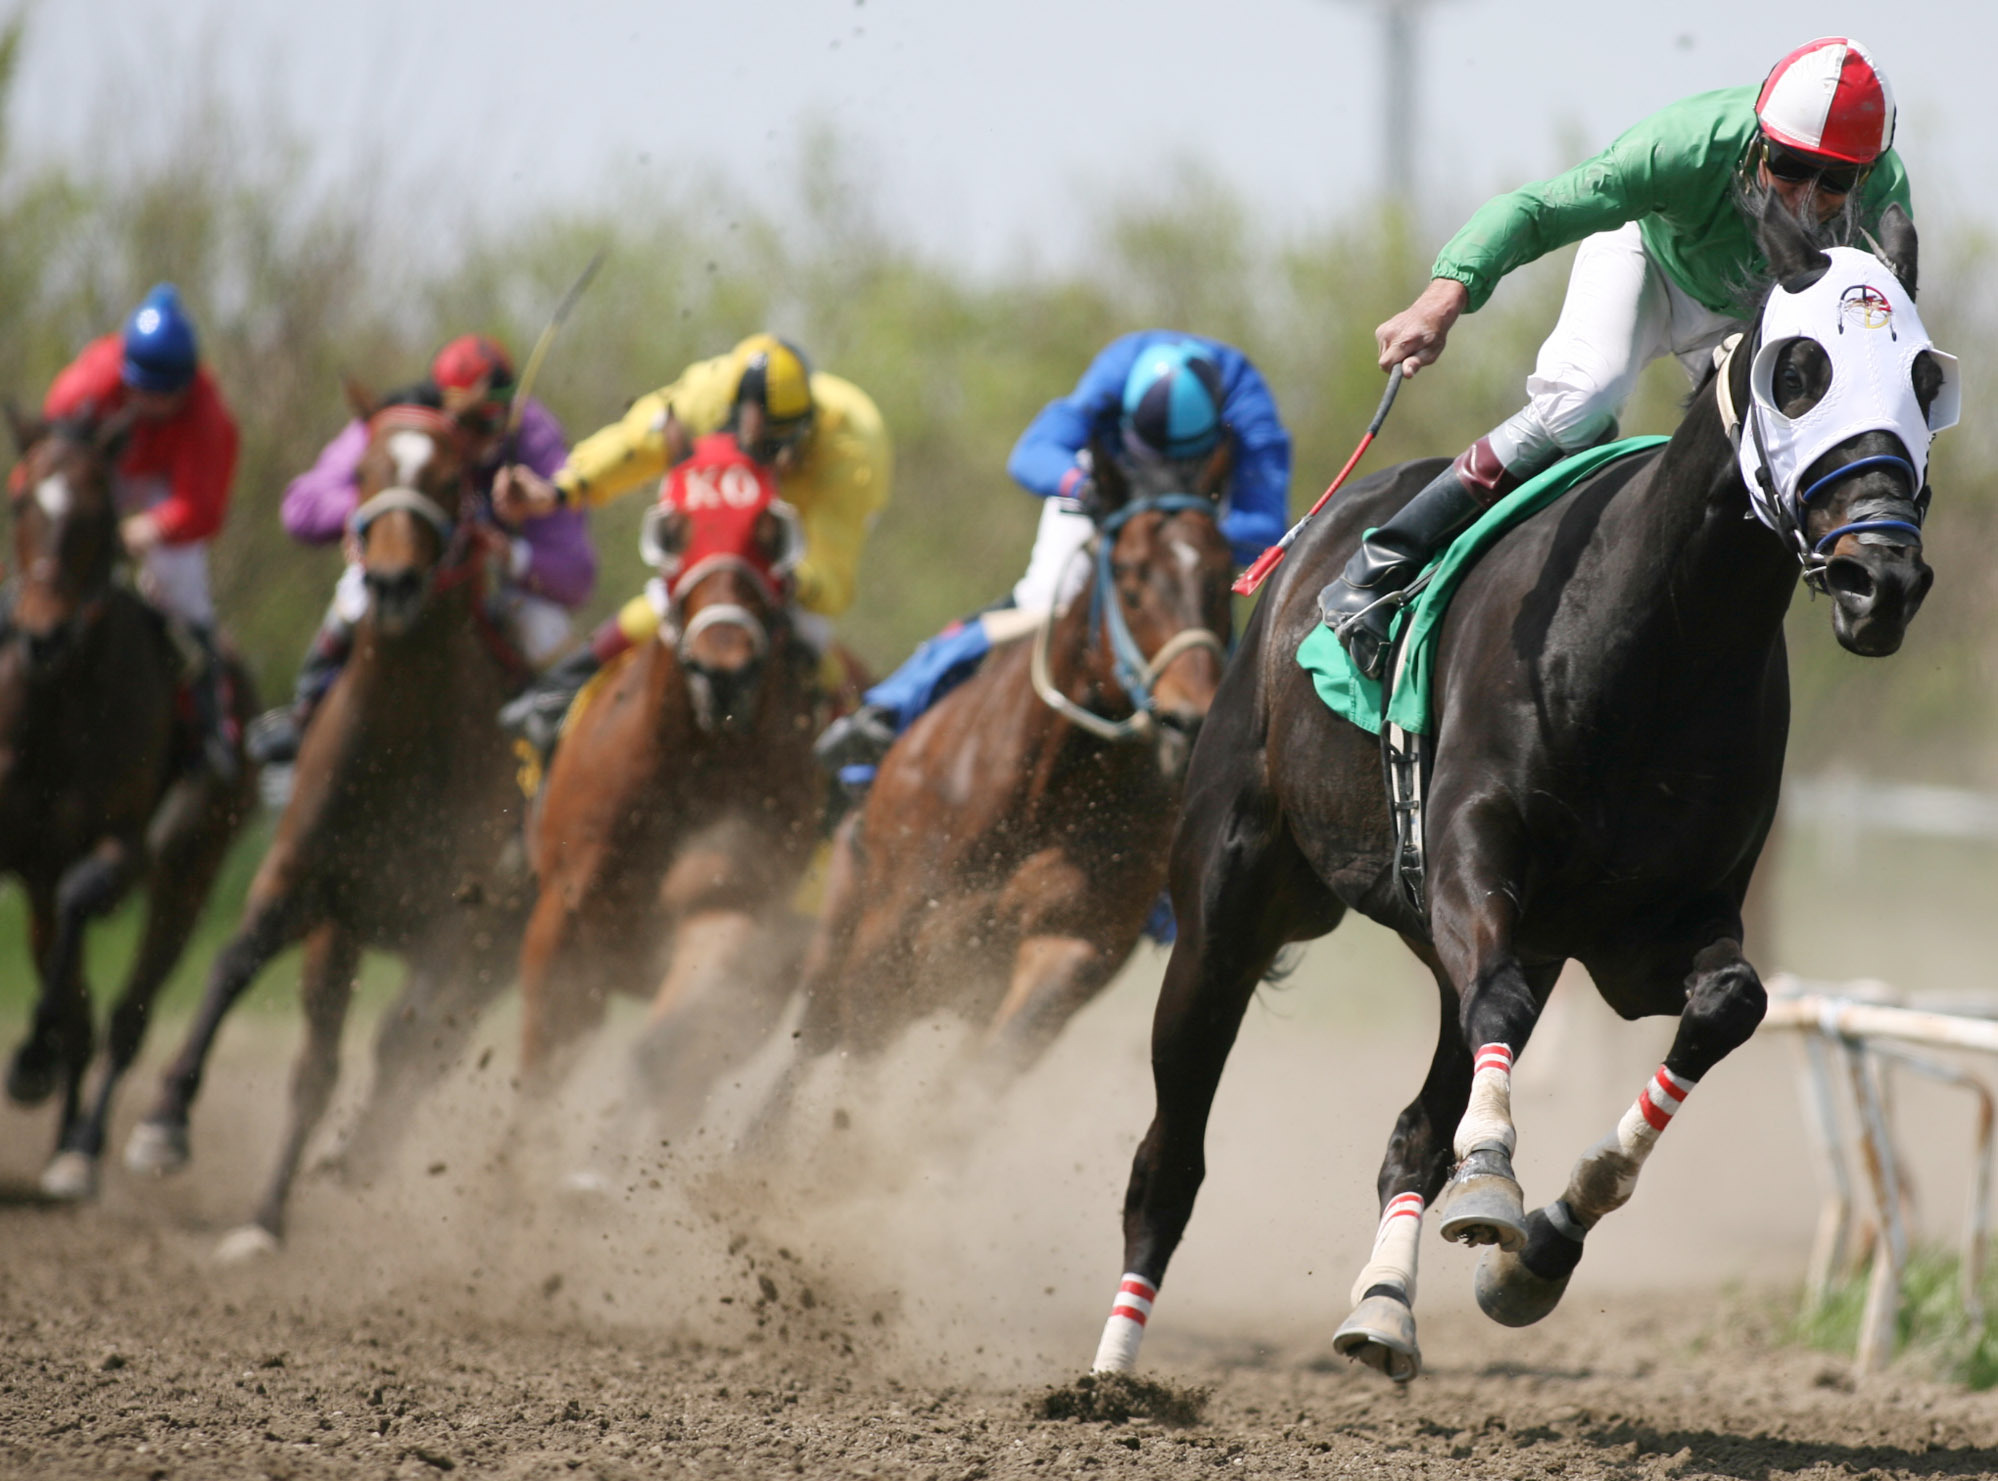 Horse race wallpapers and images - wallpapers, pictures, photos